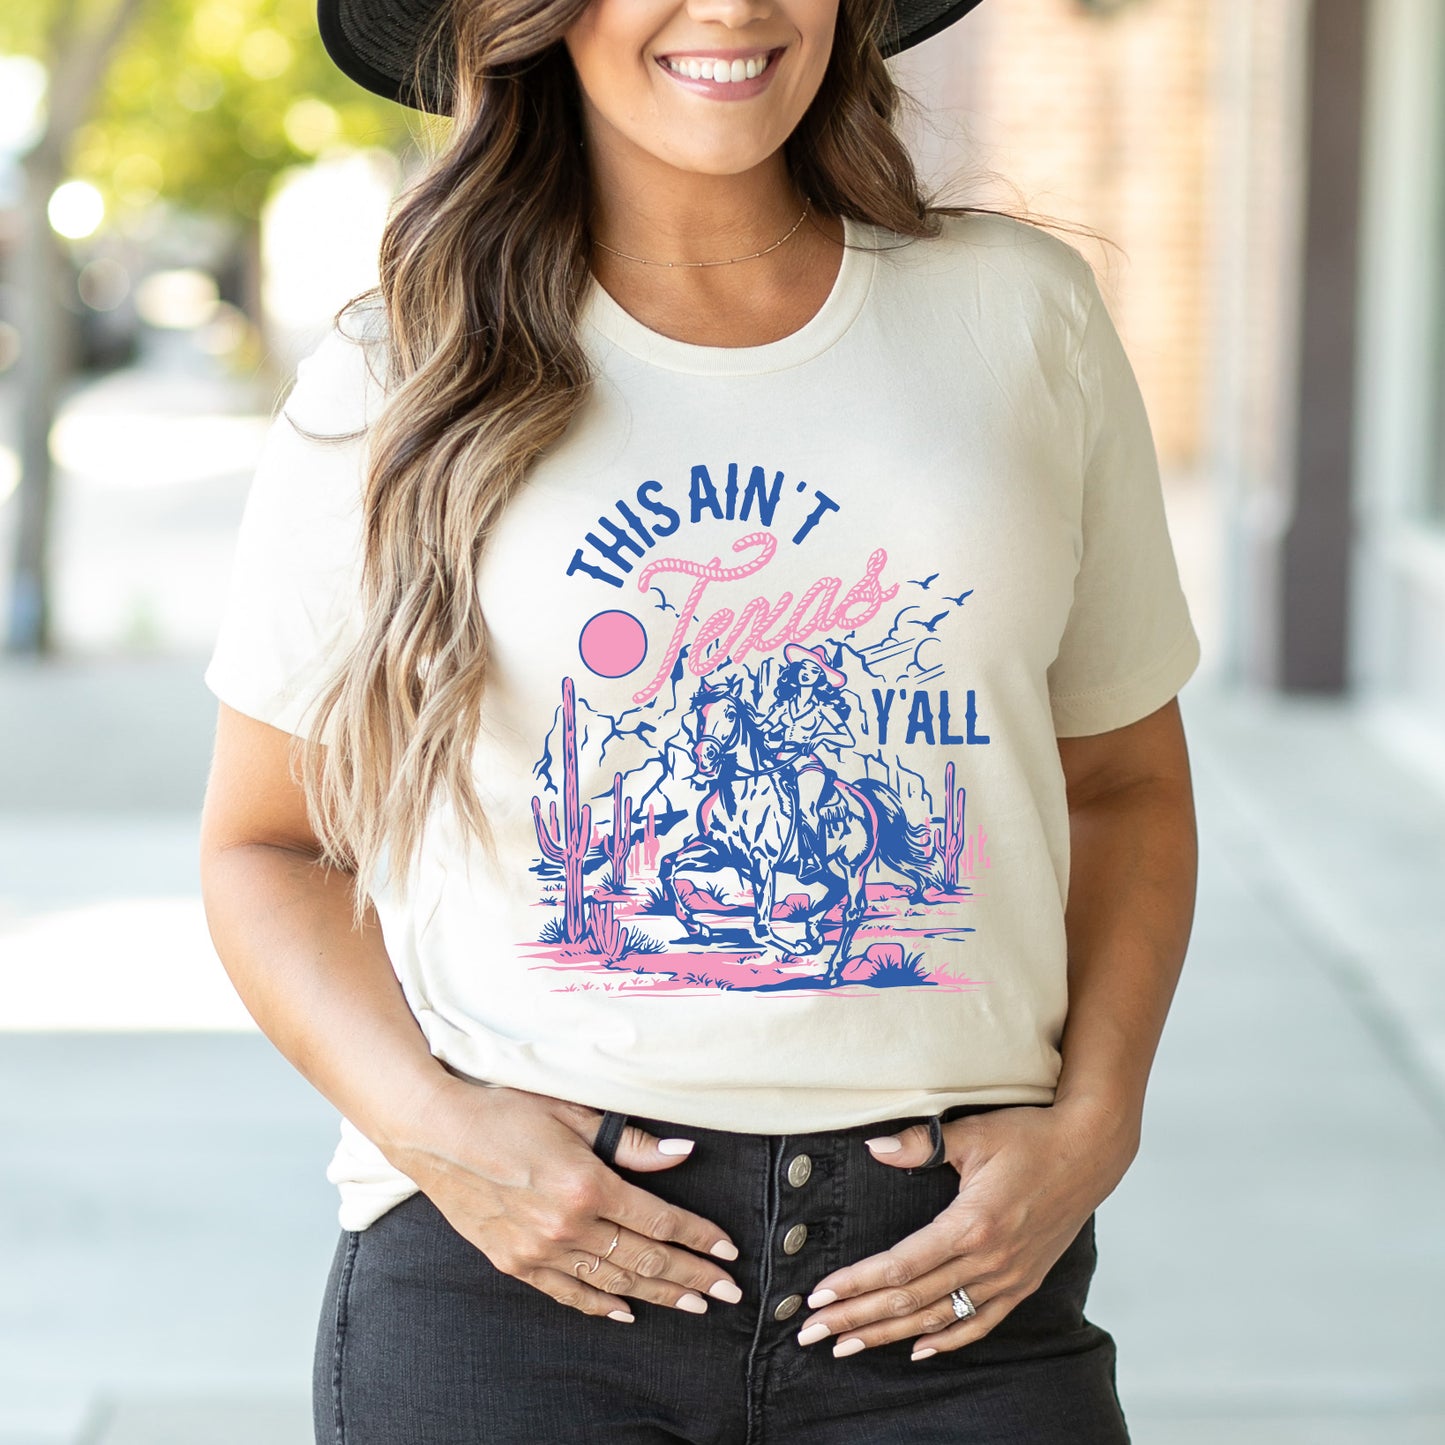 This Ain't Texas Cowgirl | Short Sleeve Graphic Tee